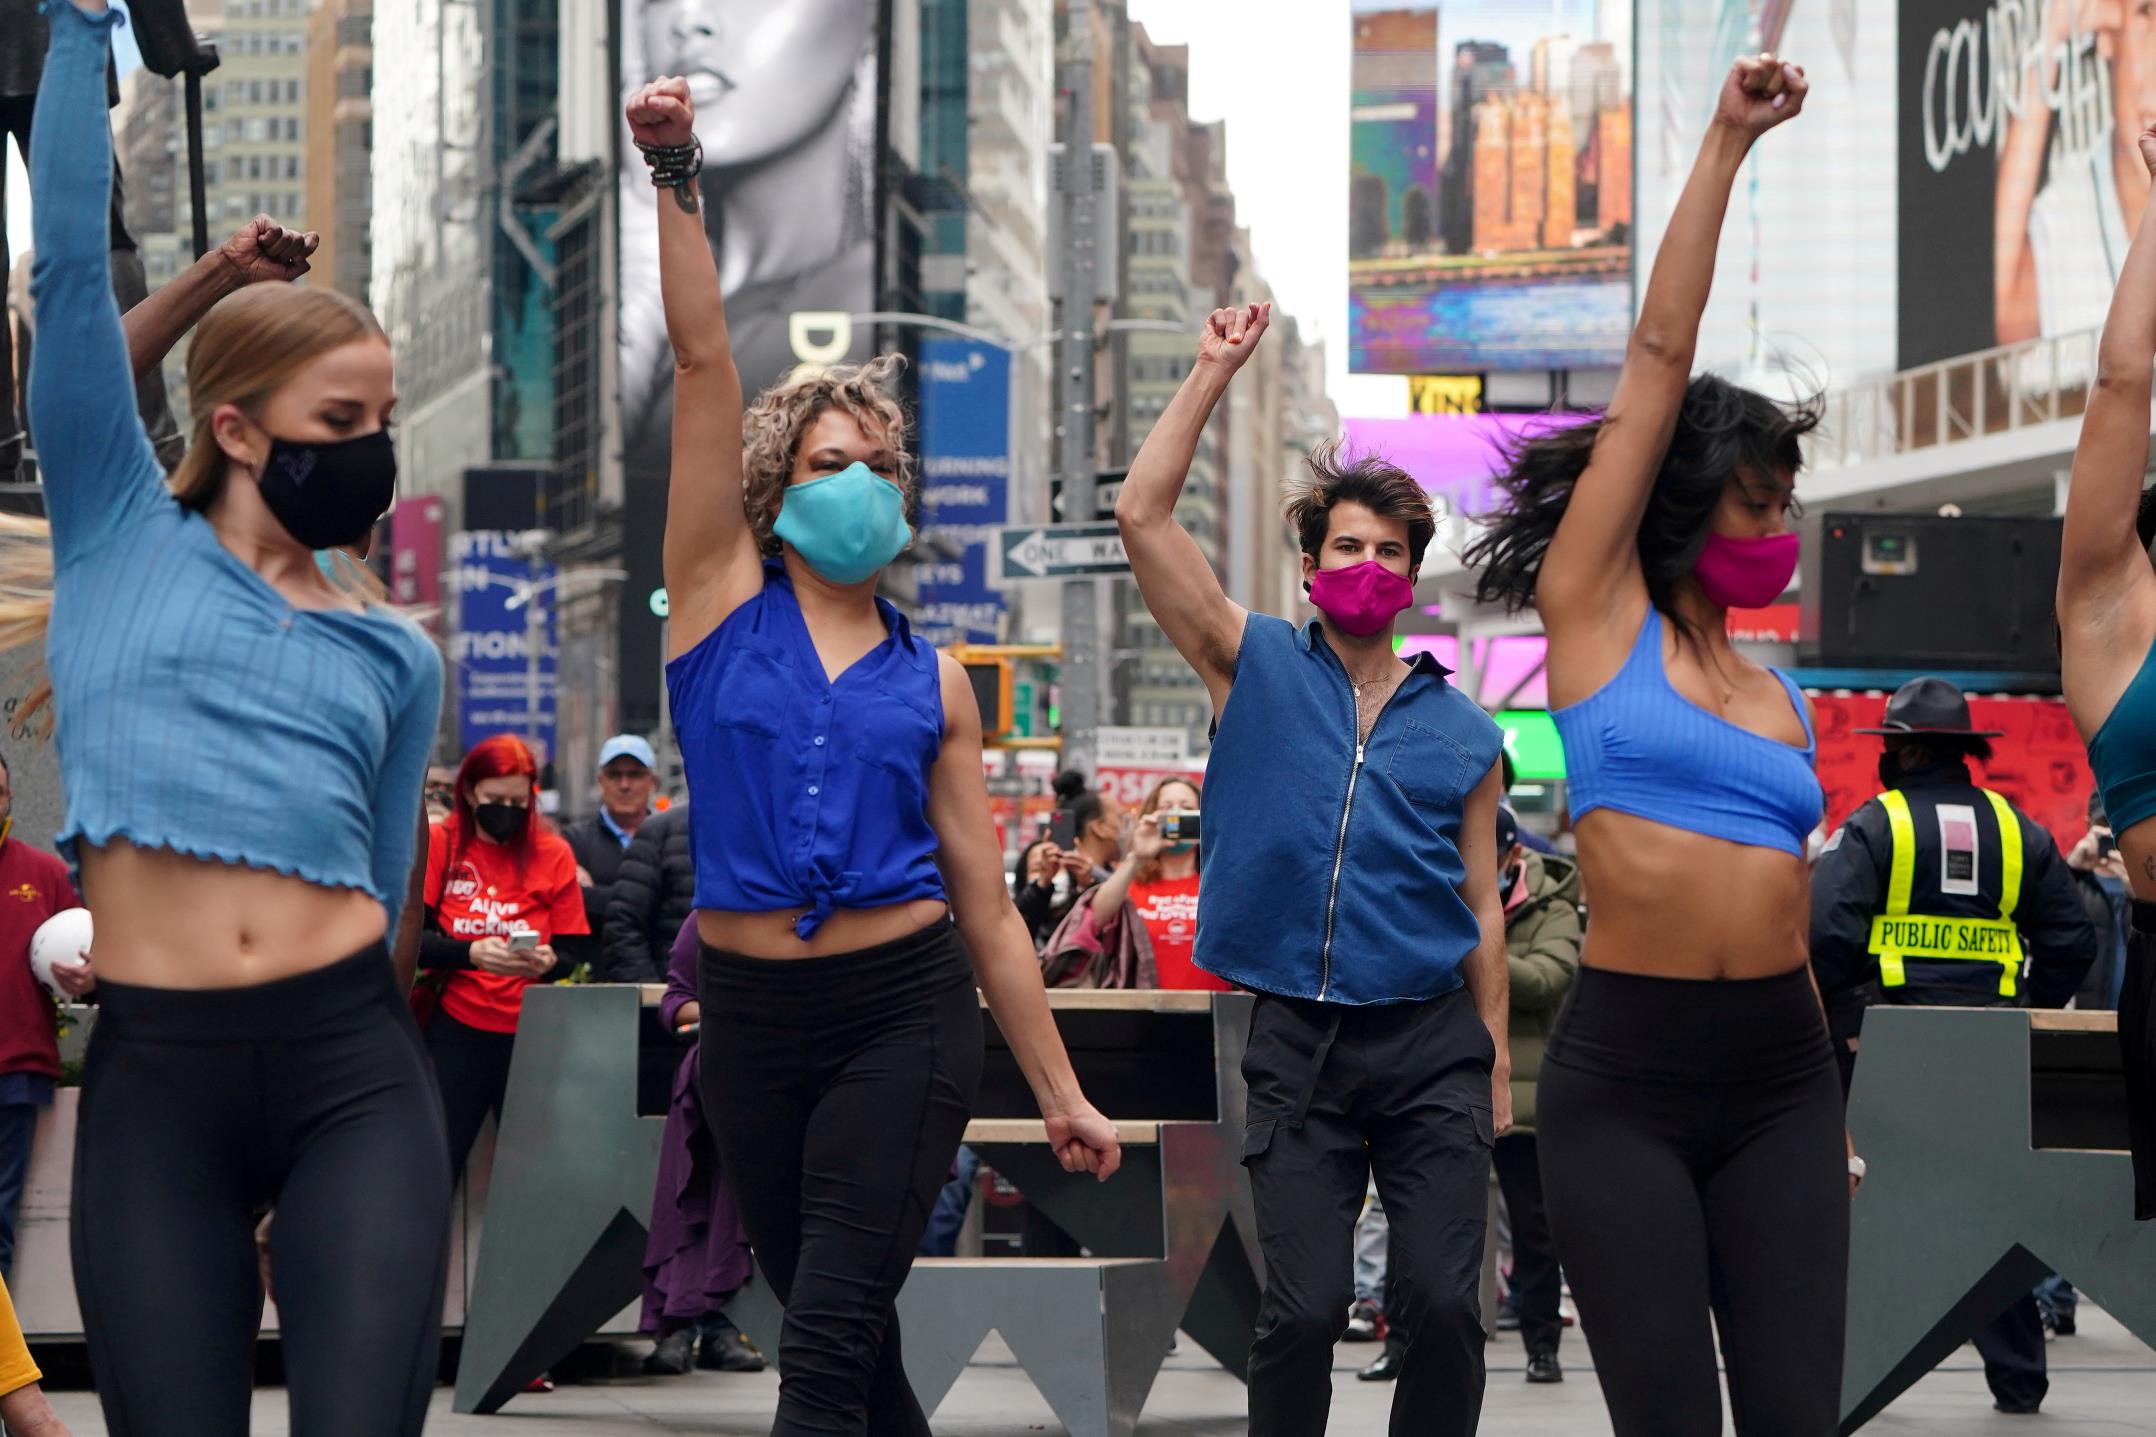 Performers take part in a pop up Broadway performance in anticipation of Broadway reopening in Times Square amid the coro<em></em>navirus disease (COVID-19) pandemic in the Manhattan borough of New York City, New York, U.S., March 12, 2021. REUTERS/Carlo Allegri